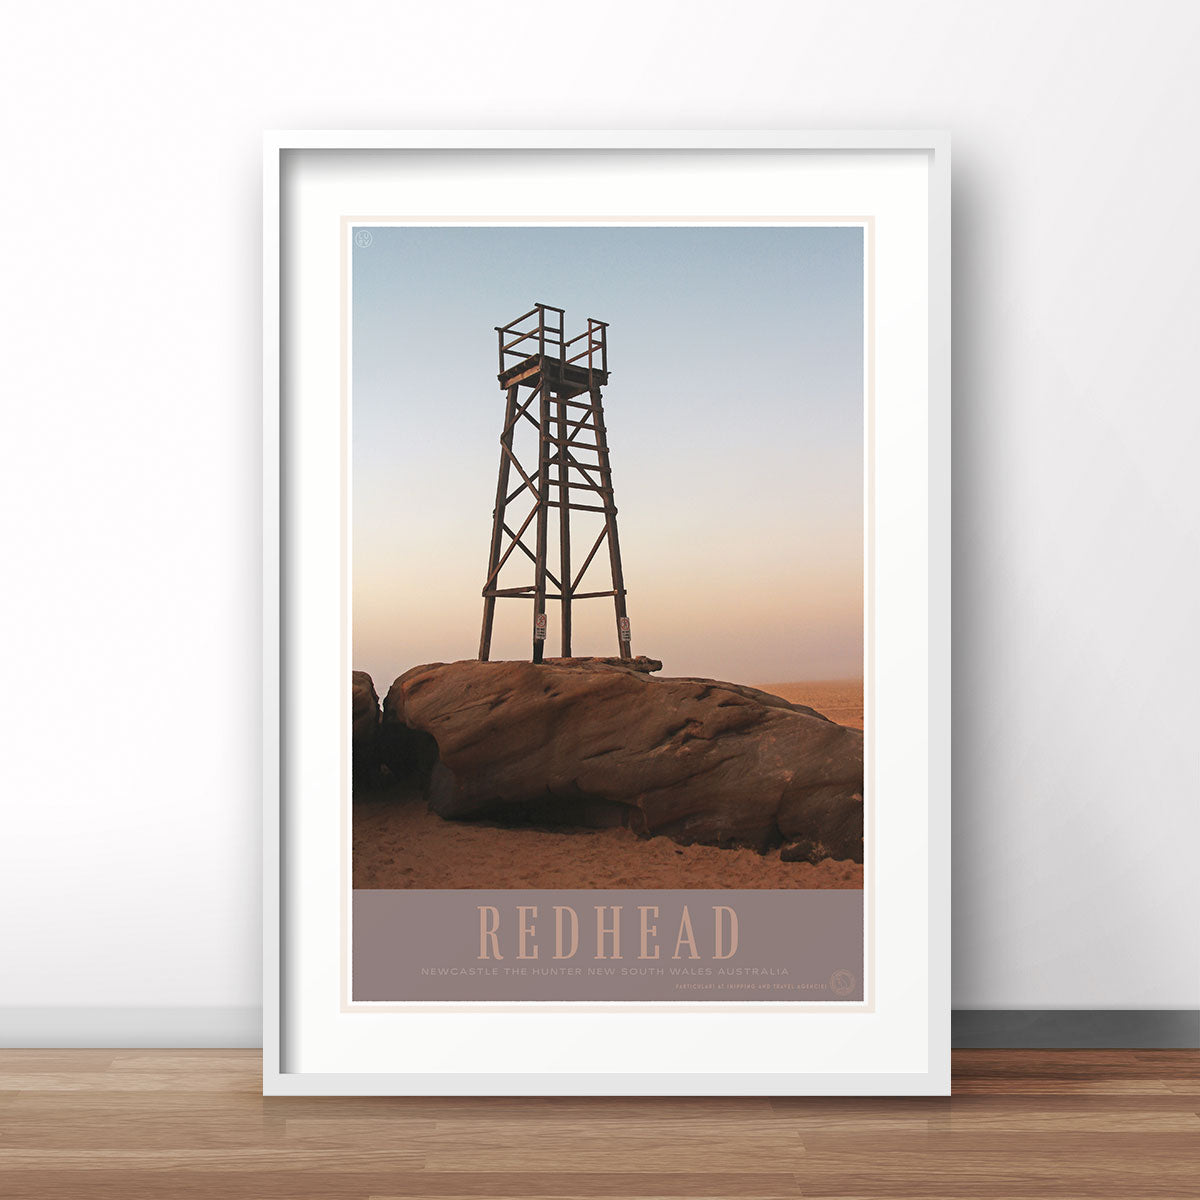 Newcastle redhead beach vintage retro poster print from places we luv